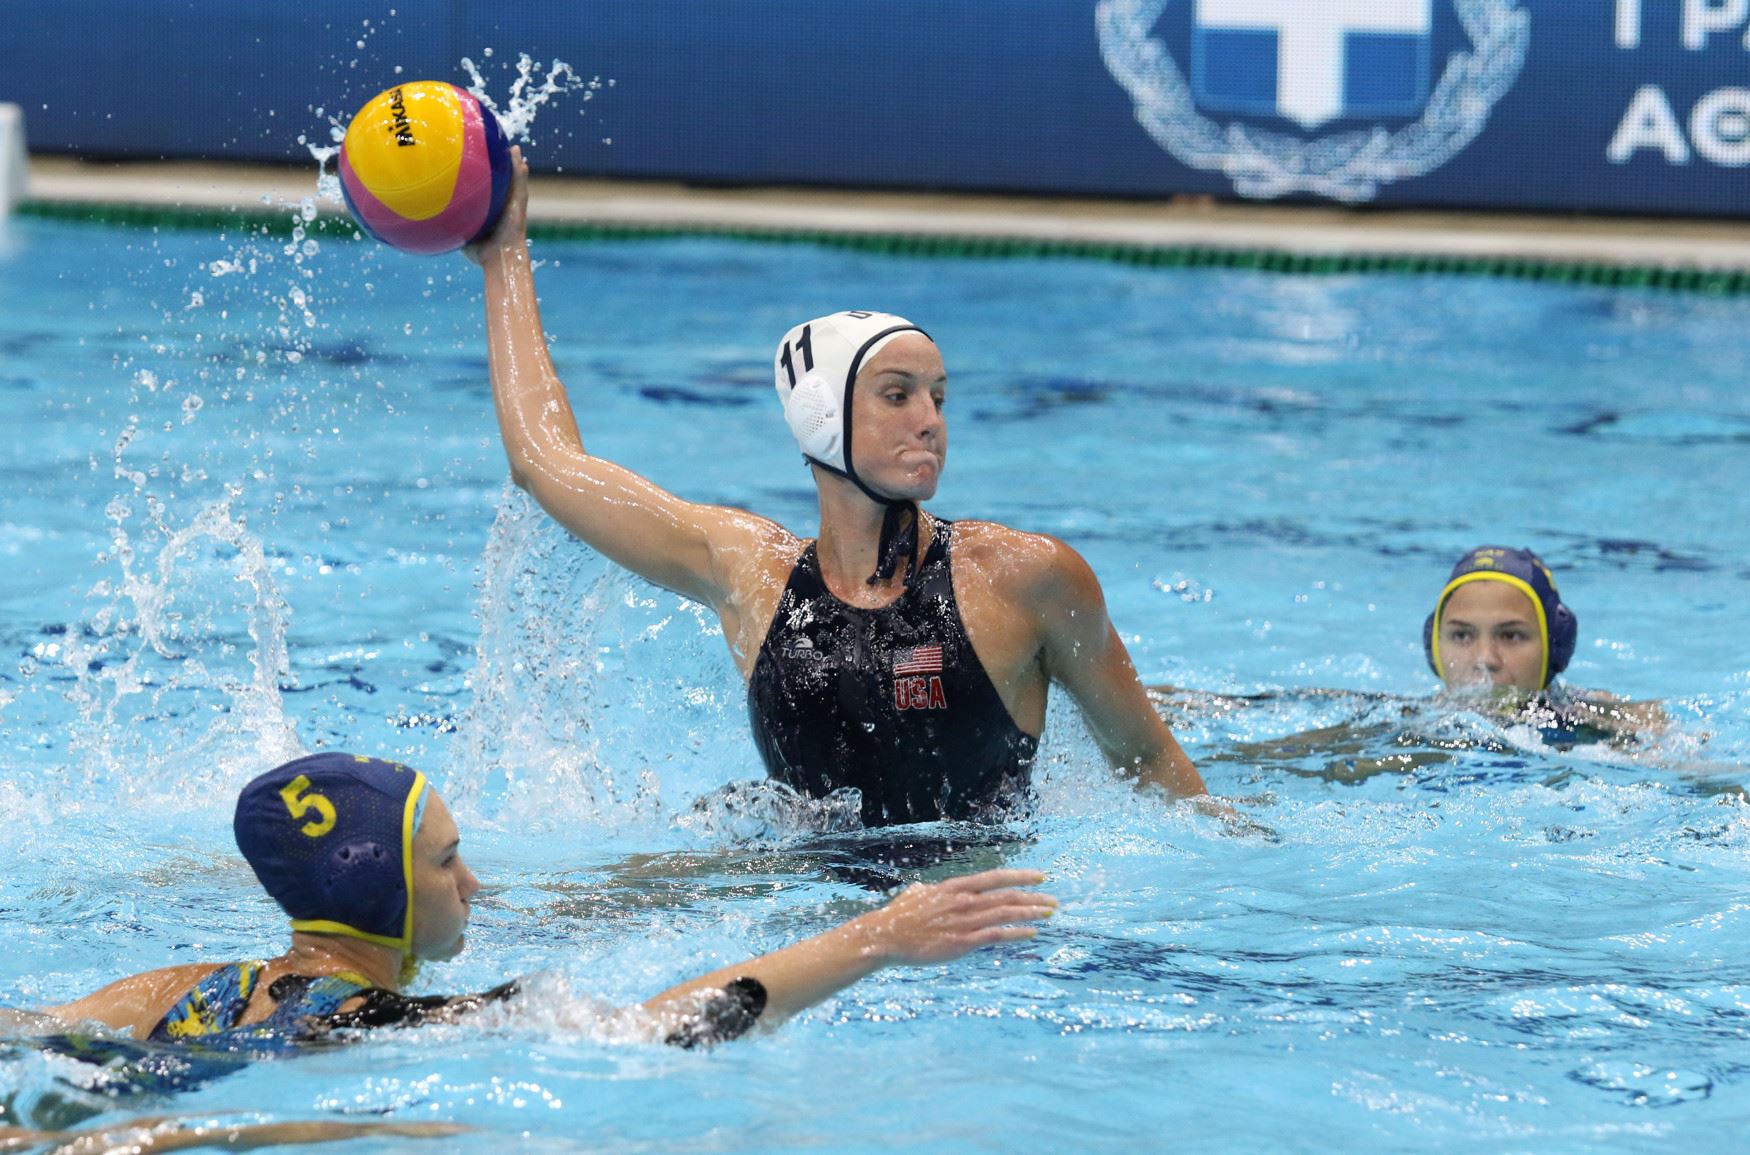 water polo at the 2020 summer olympics